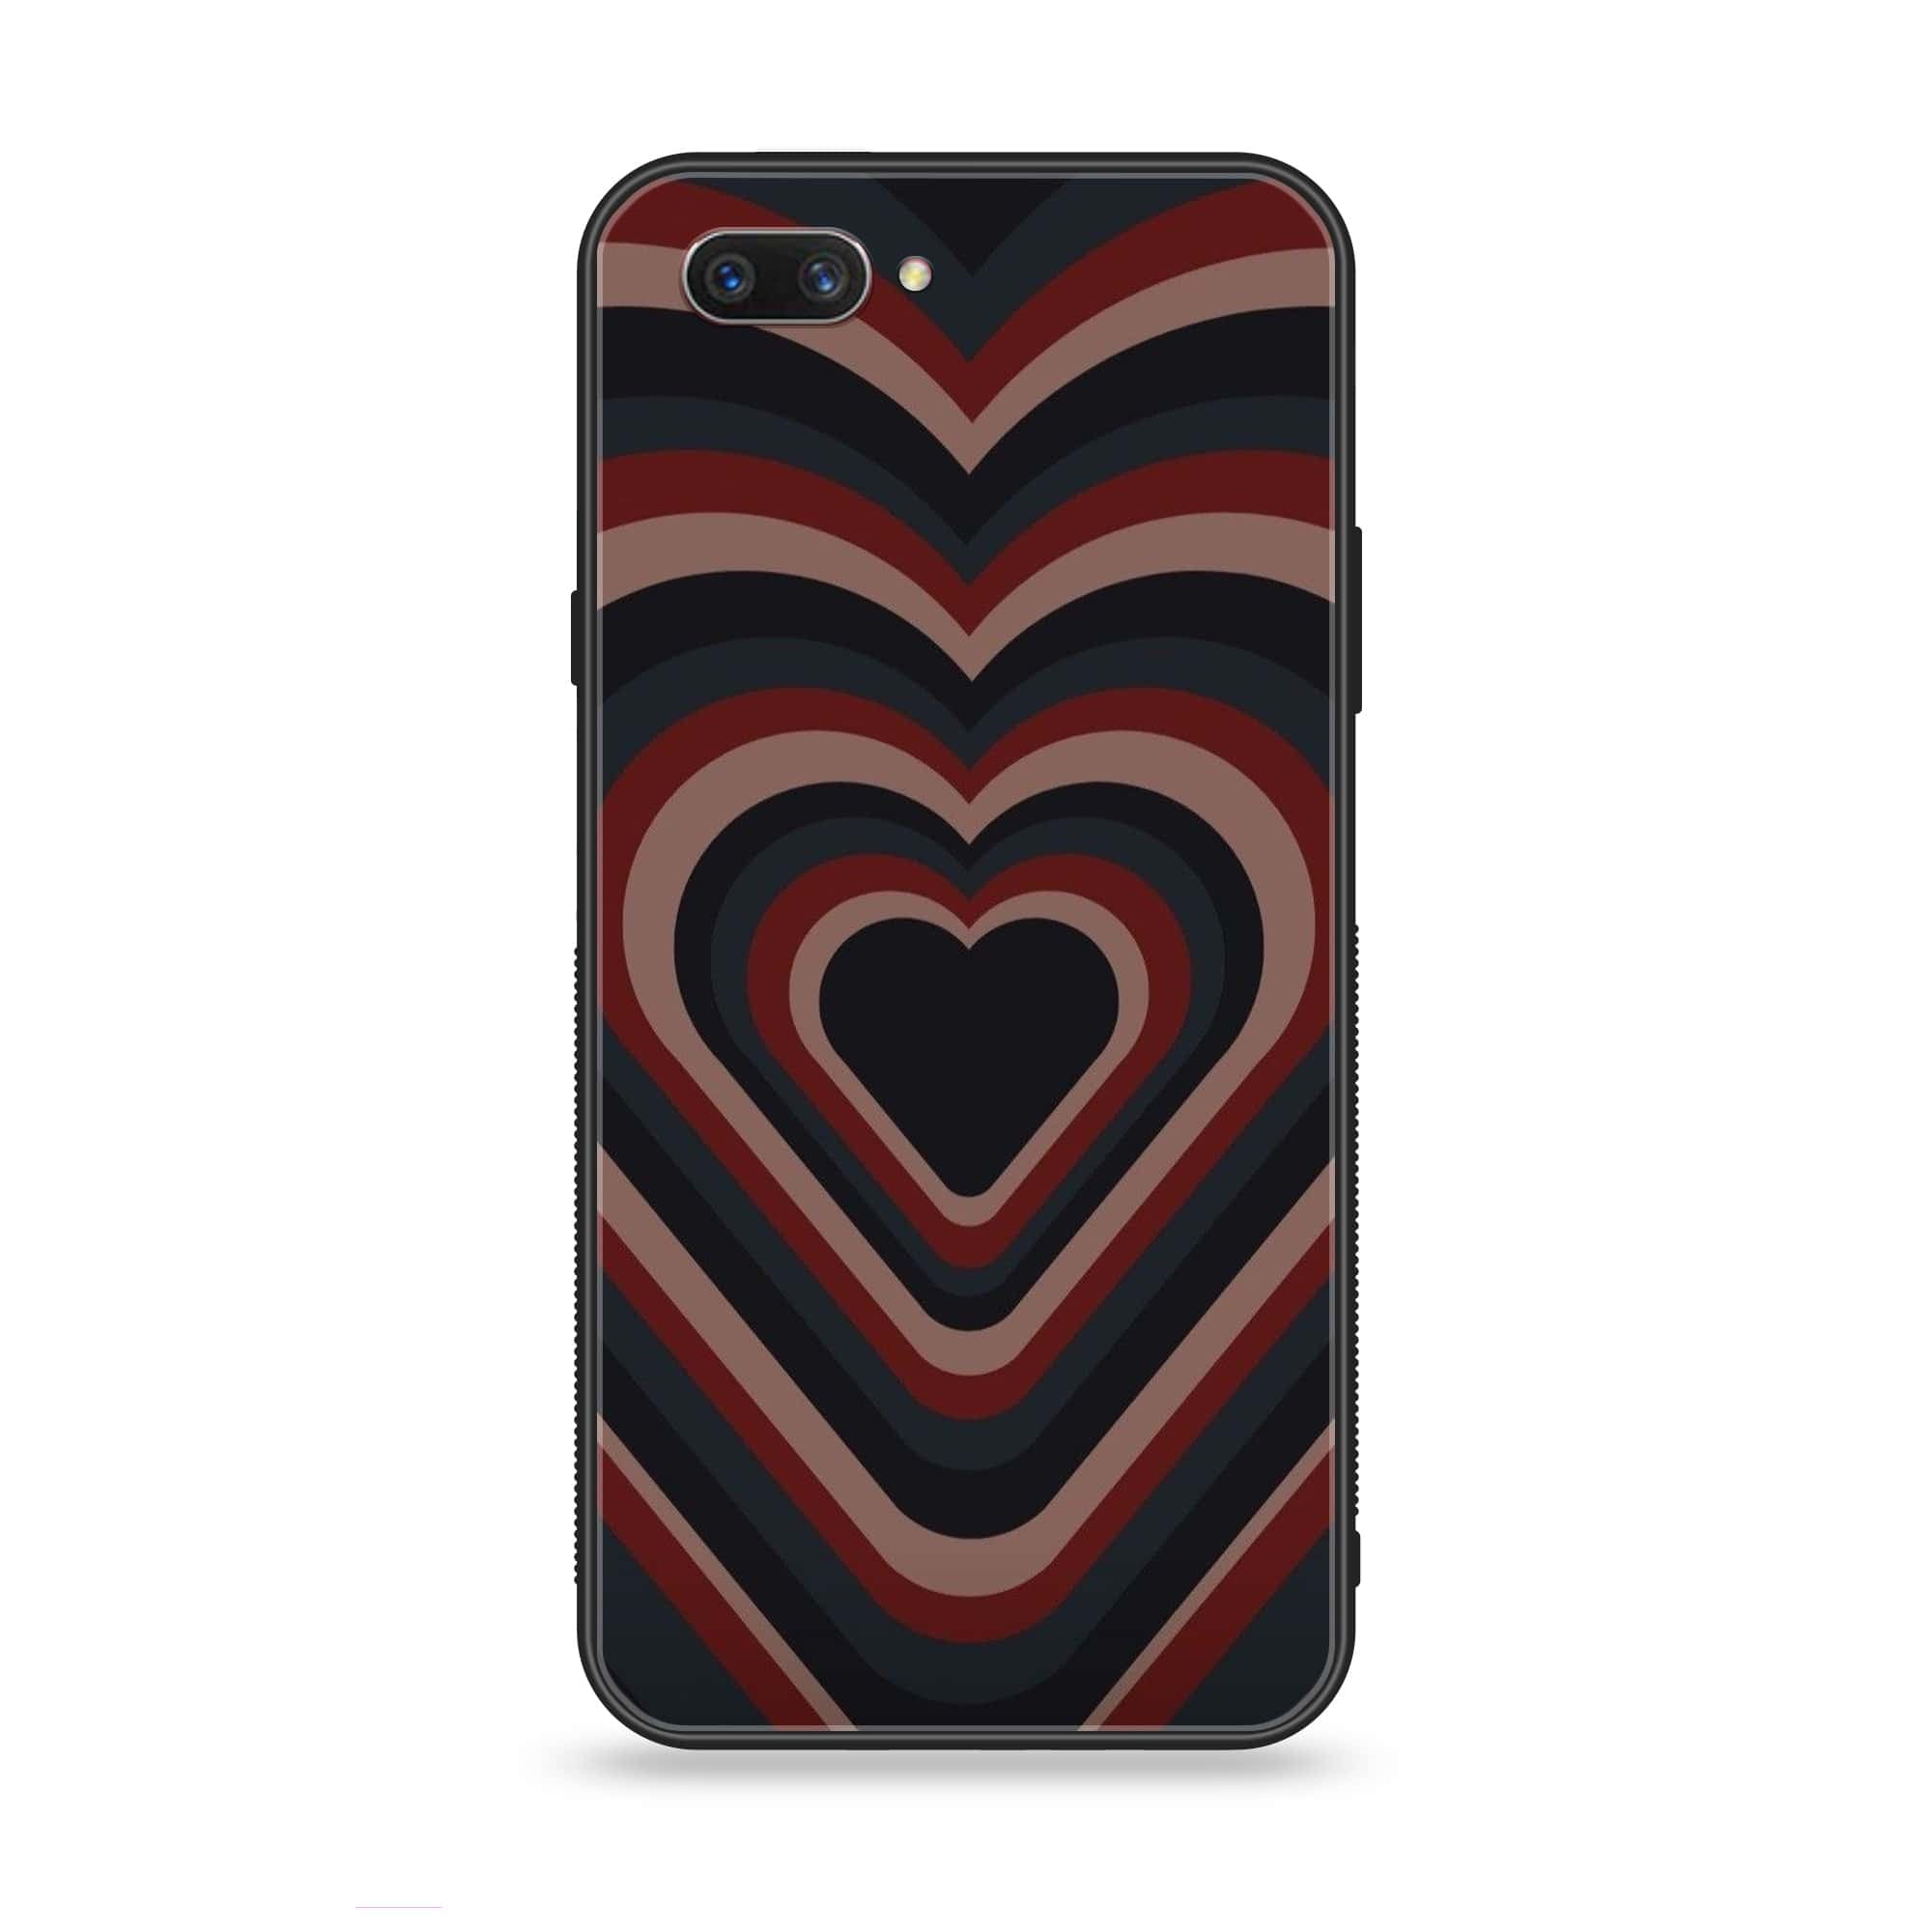 Oppo A3s - Heart Beat 2.0 Series - Premium Printed Glass soft Bumper shock Proof Case